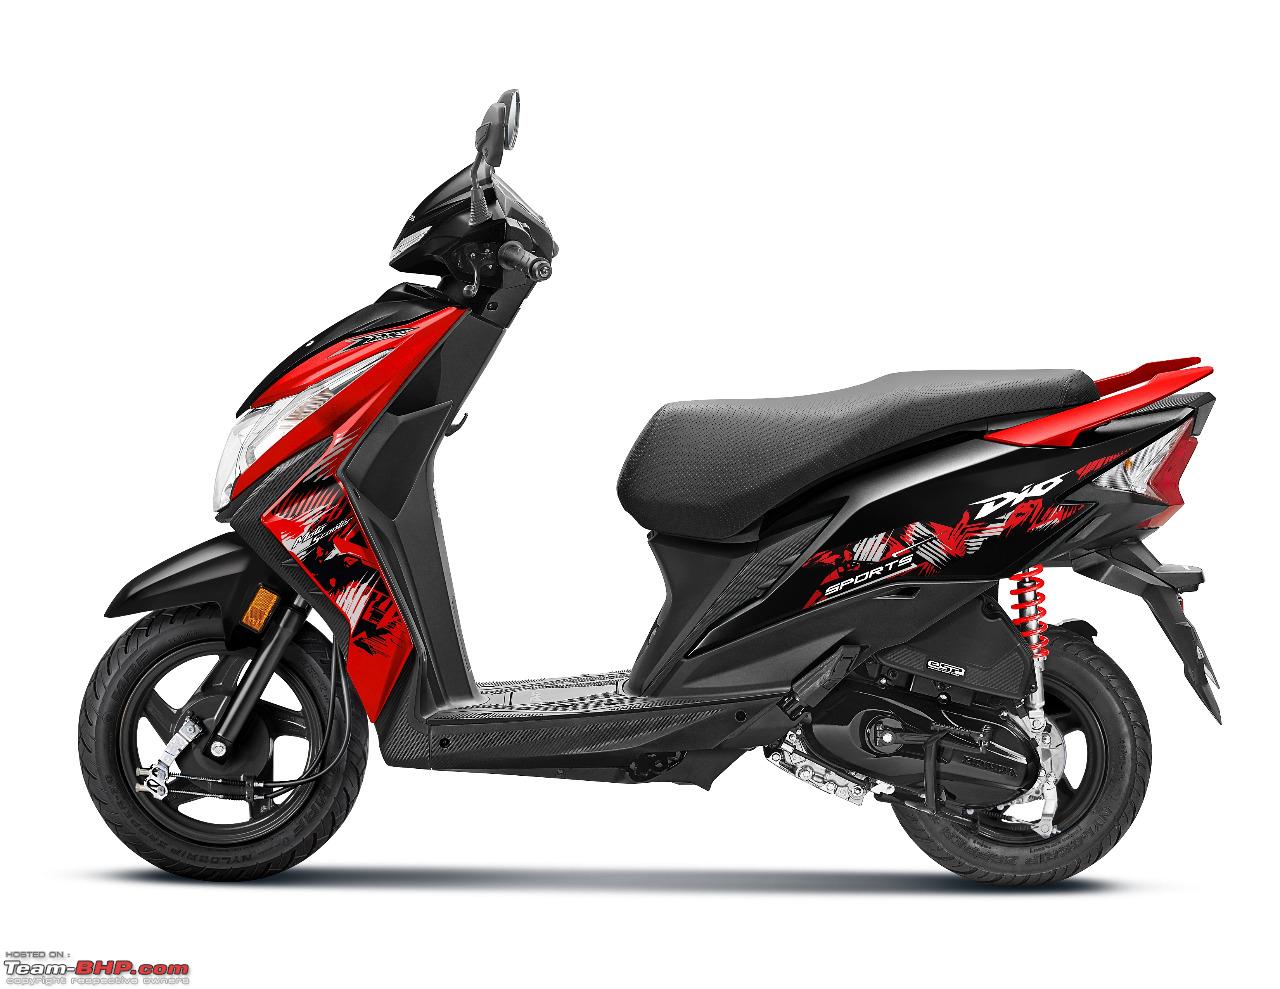 Honda Dio Sports limited edition launched at Rs. 68,317 - Team-BHP